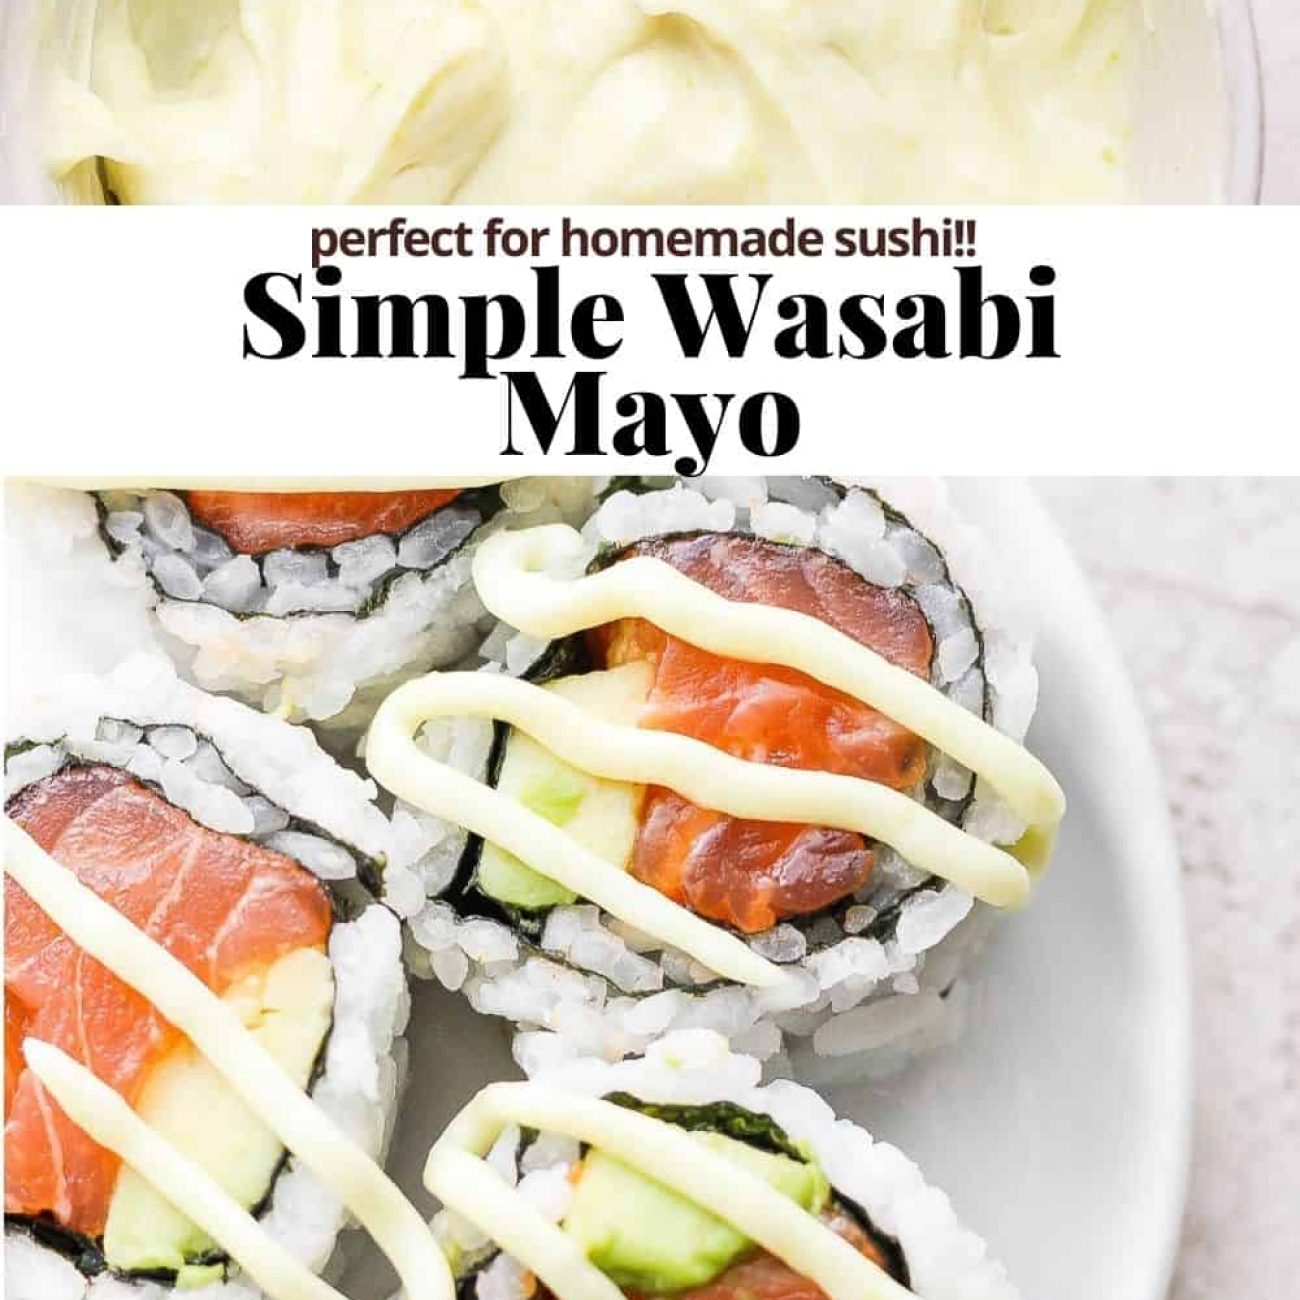 Spicy Homemade Wasabi Sauce Recipe for Sushi and Beyond